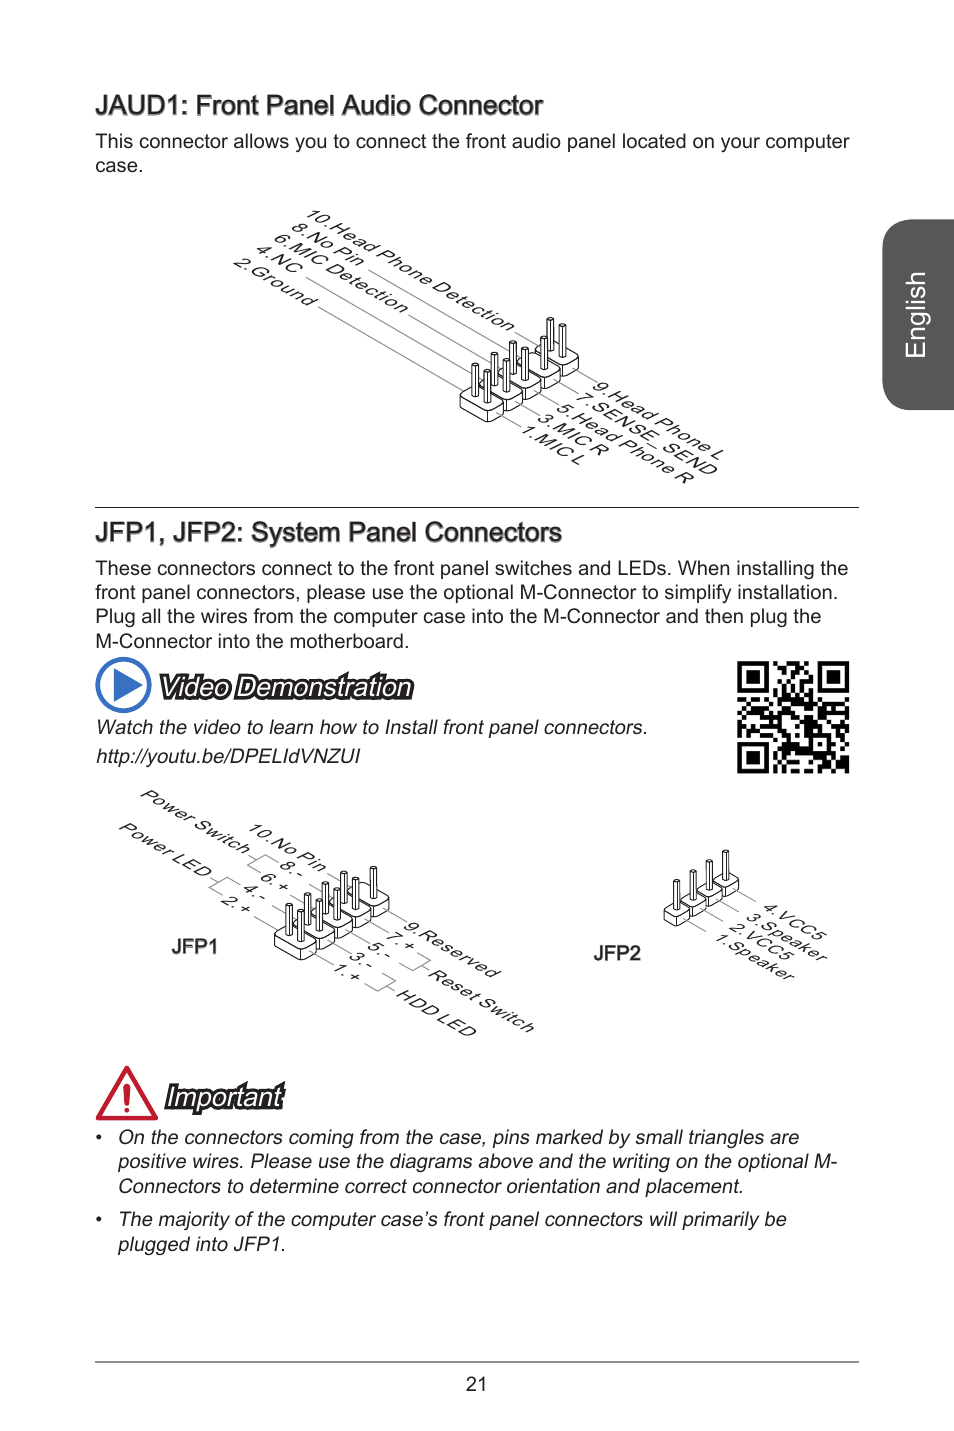 English, Jaud : front panel audio connector, Jfp , jfp2: system panel  connectors | MSI A55M-E33 User Manual | Page 21 / 170